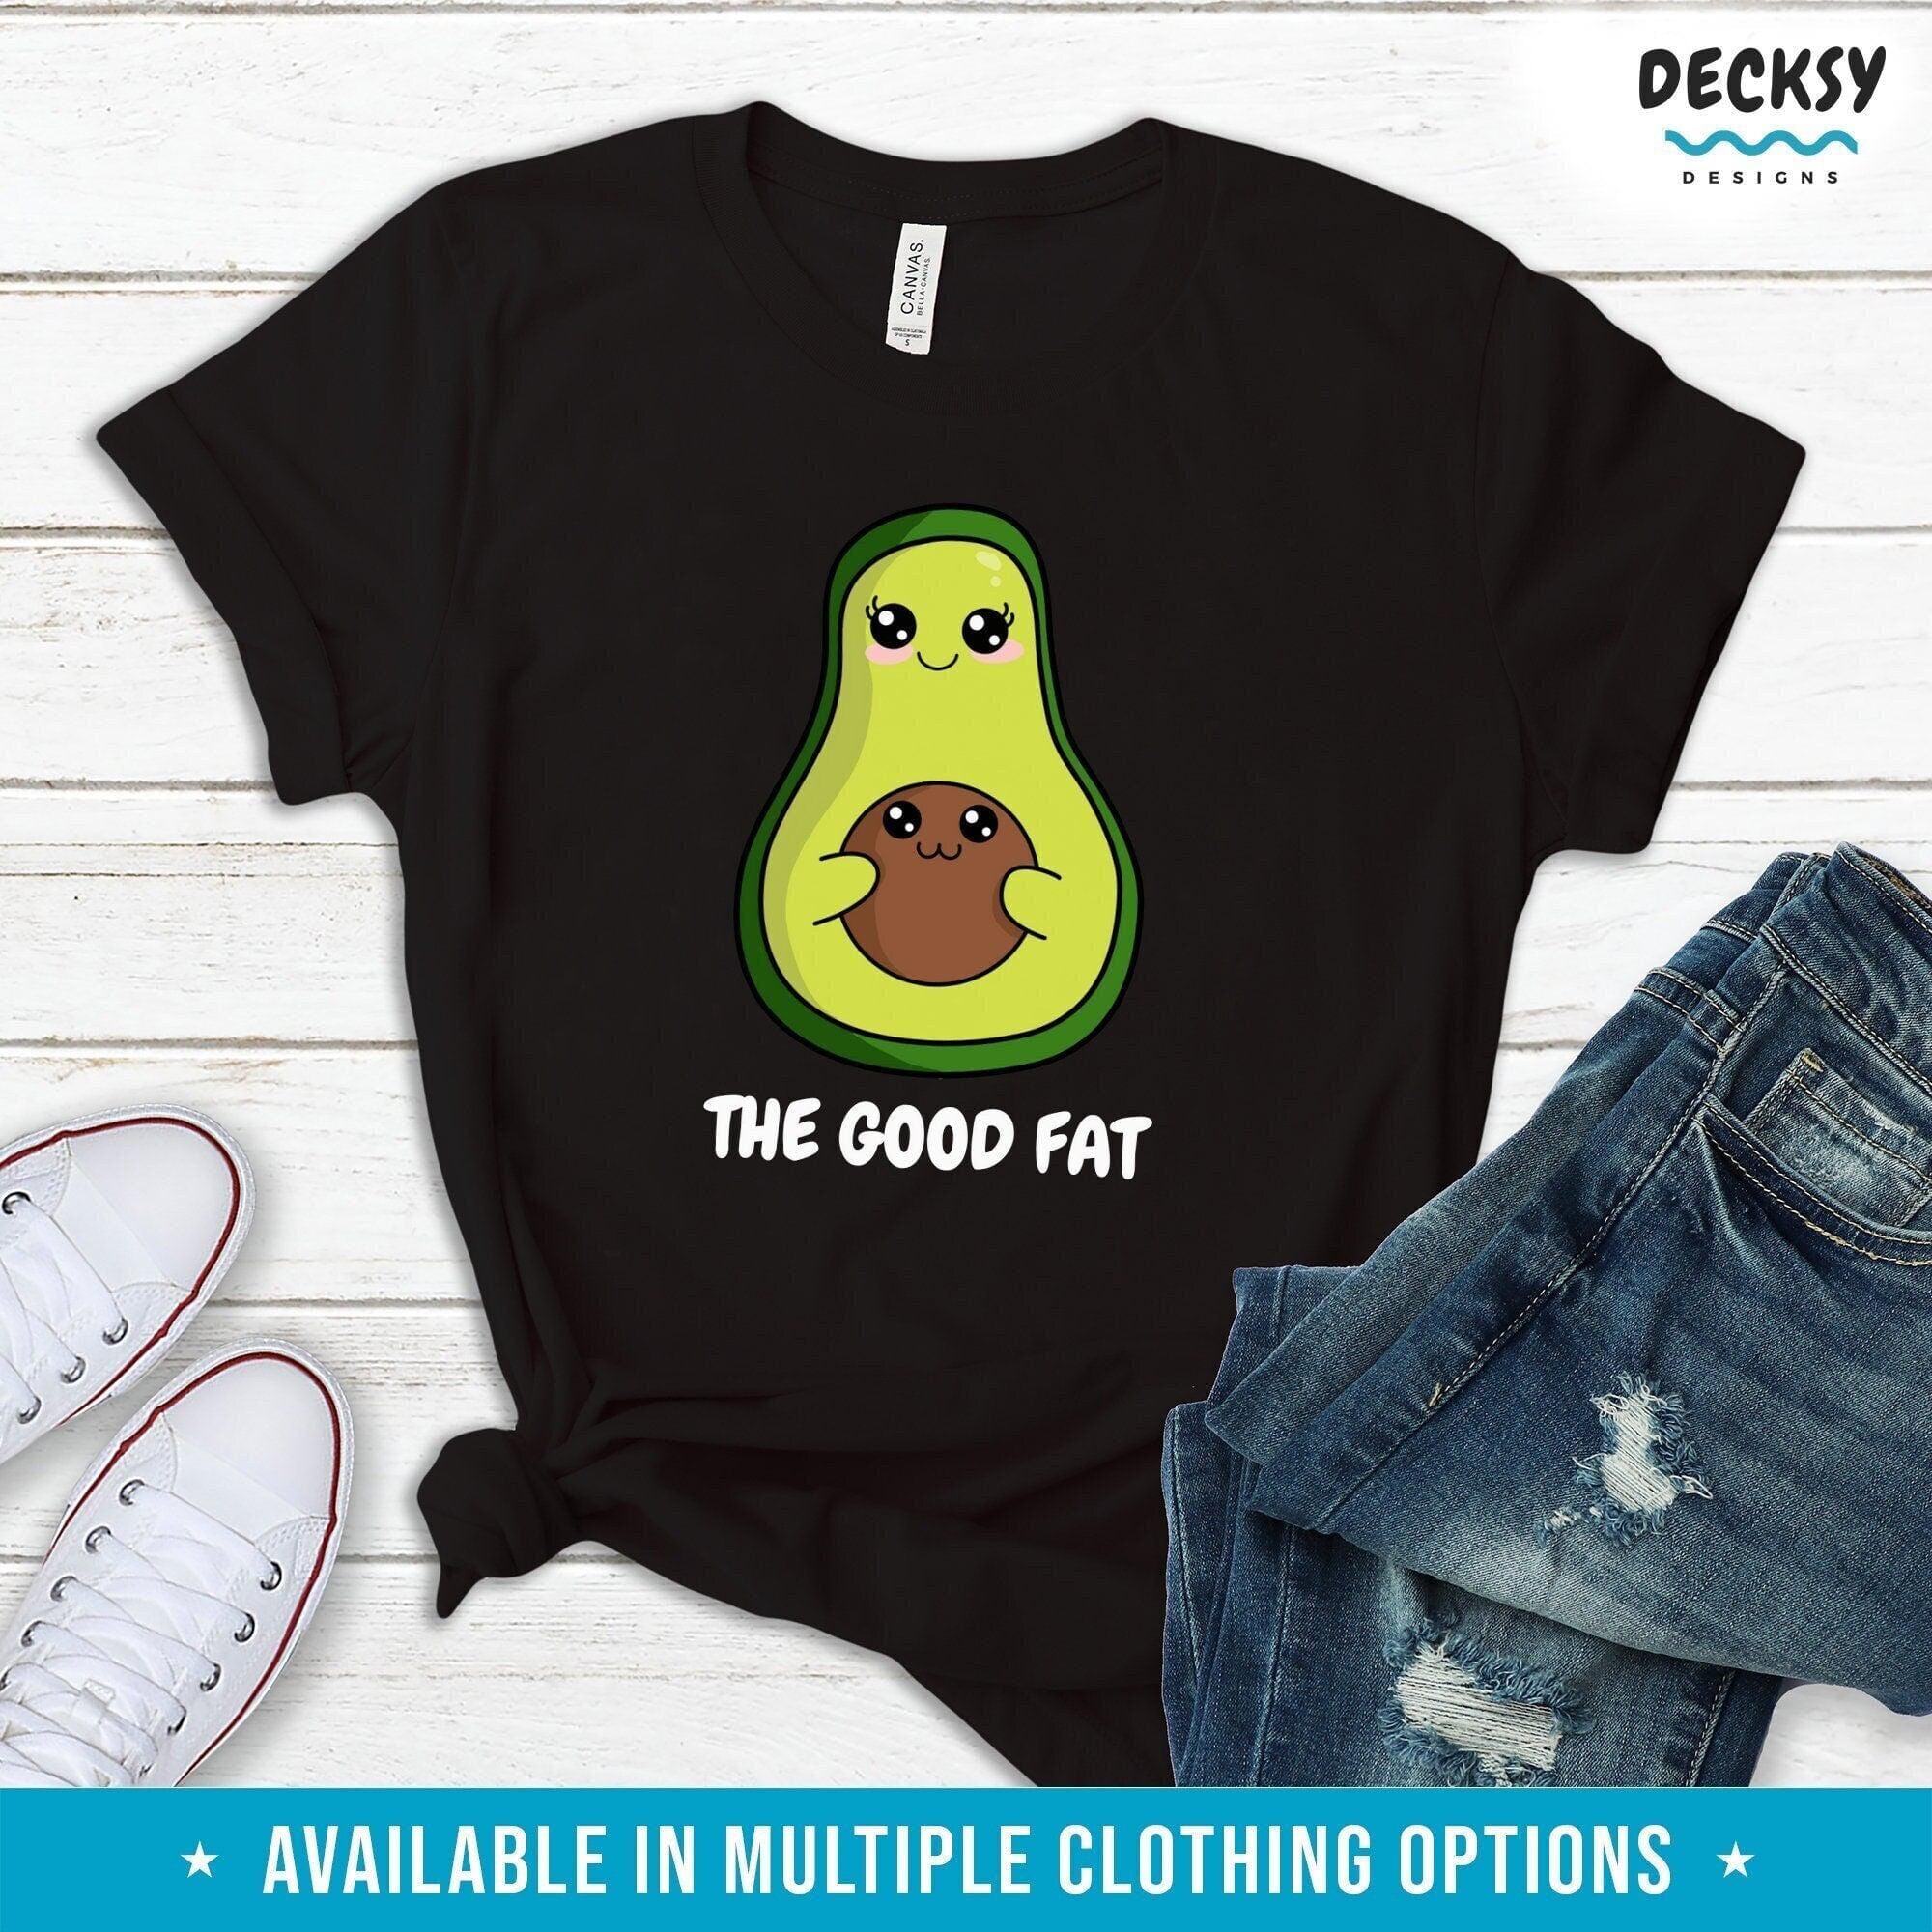 Avocado Pregnancy Reveal Shirt, Gift For Mom To Be-Clothing:Gender-Neutral Adult Clothing:Tops & Tees:T-shirts:Graphic Tees-DecksyDesigns